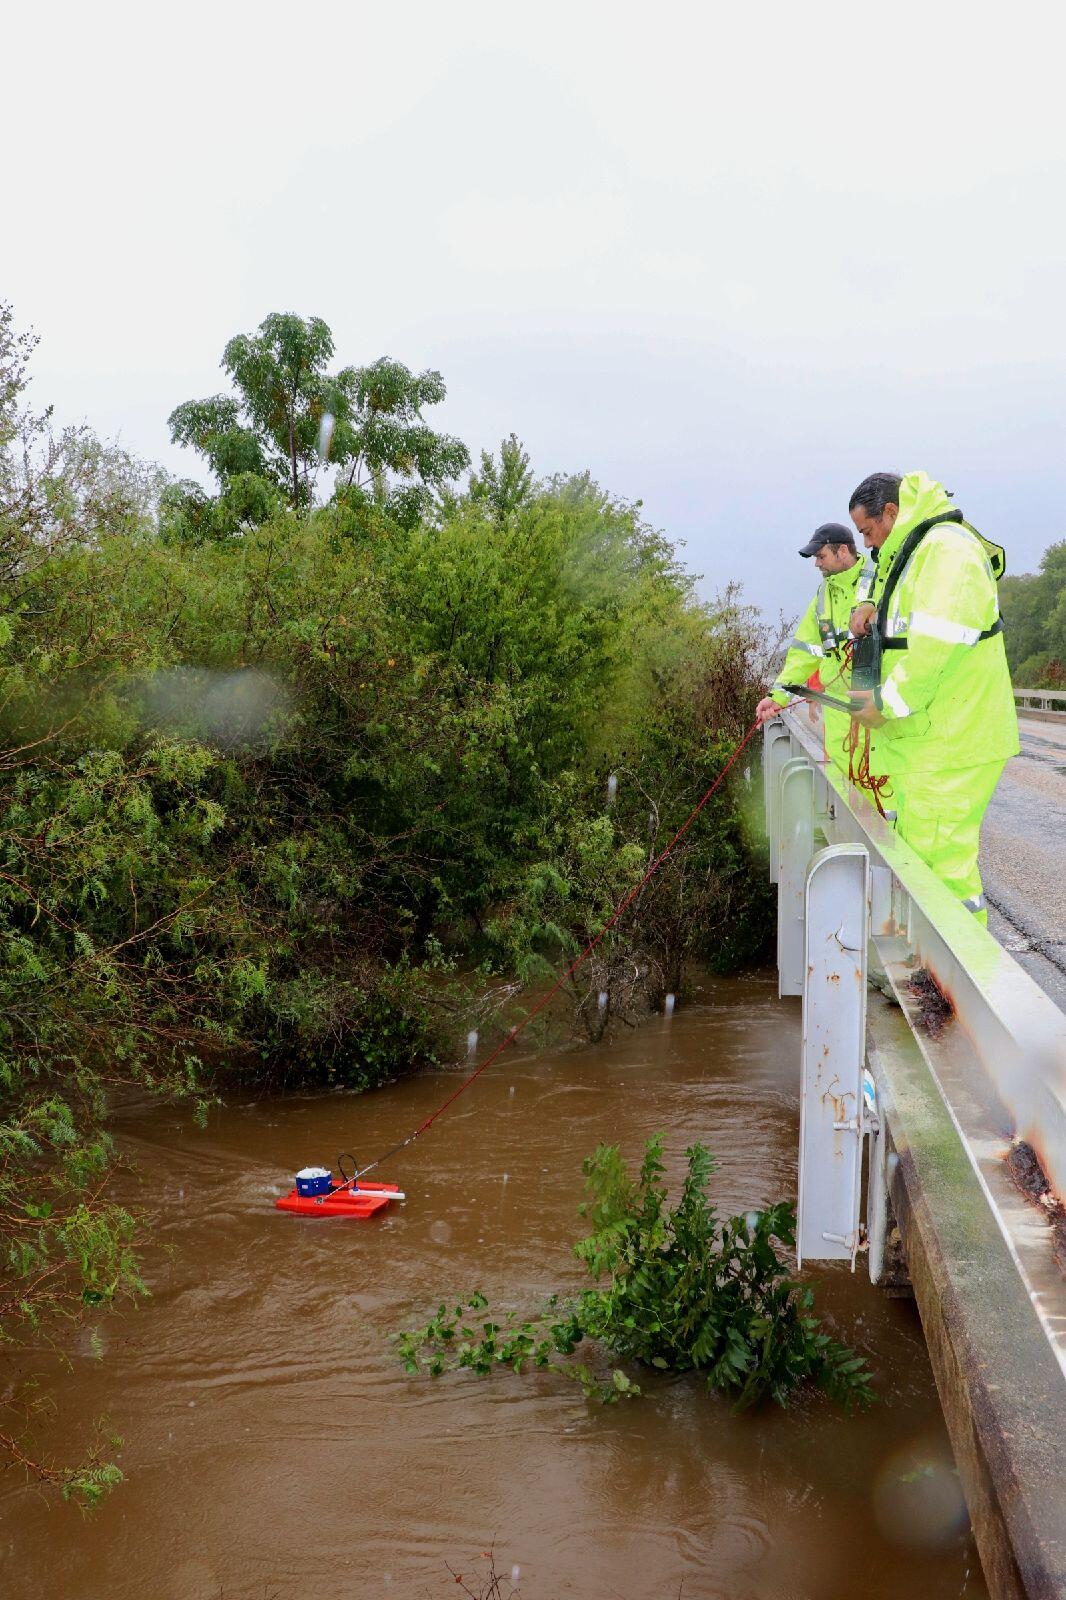 Image shows USGS scientists in PFDs with an acoustic doppler sensor in a flooded river